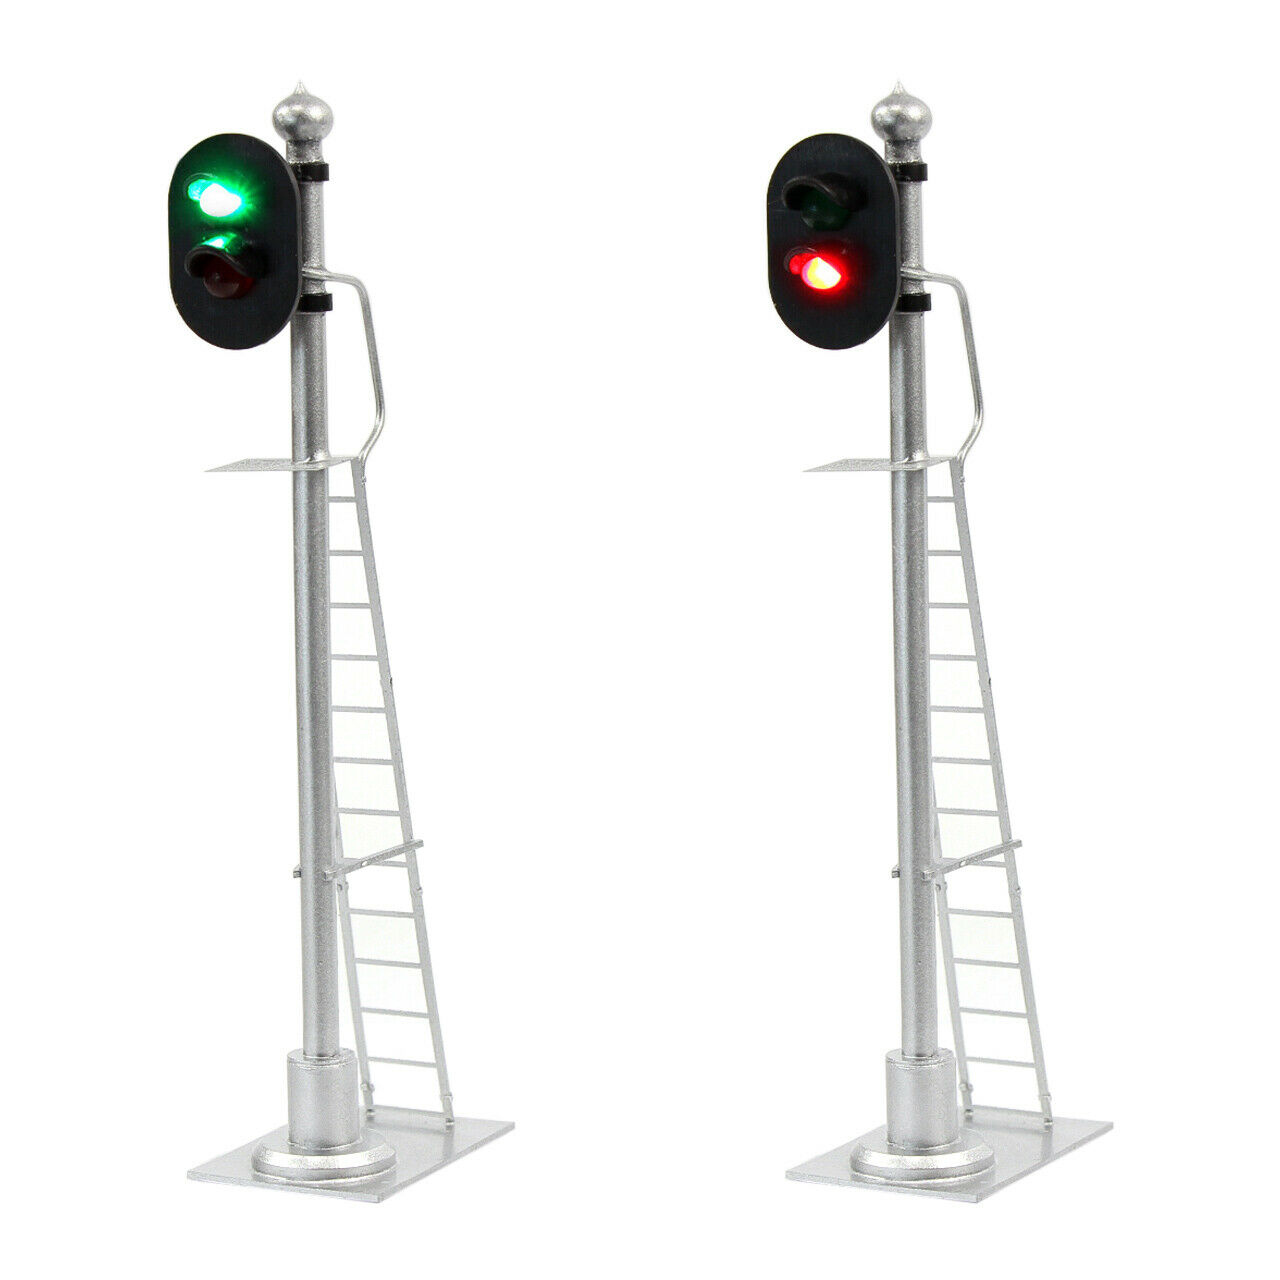 2pcs O Scale 1:43 Model Railway Signals Green Red Block Signal With Ladder